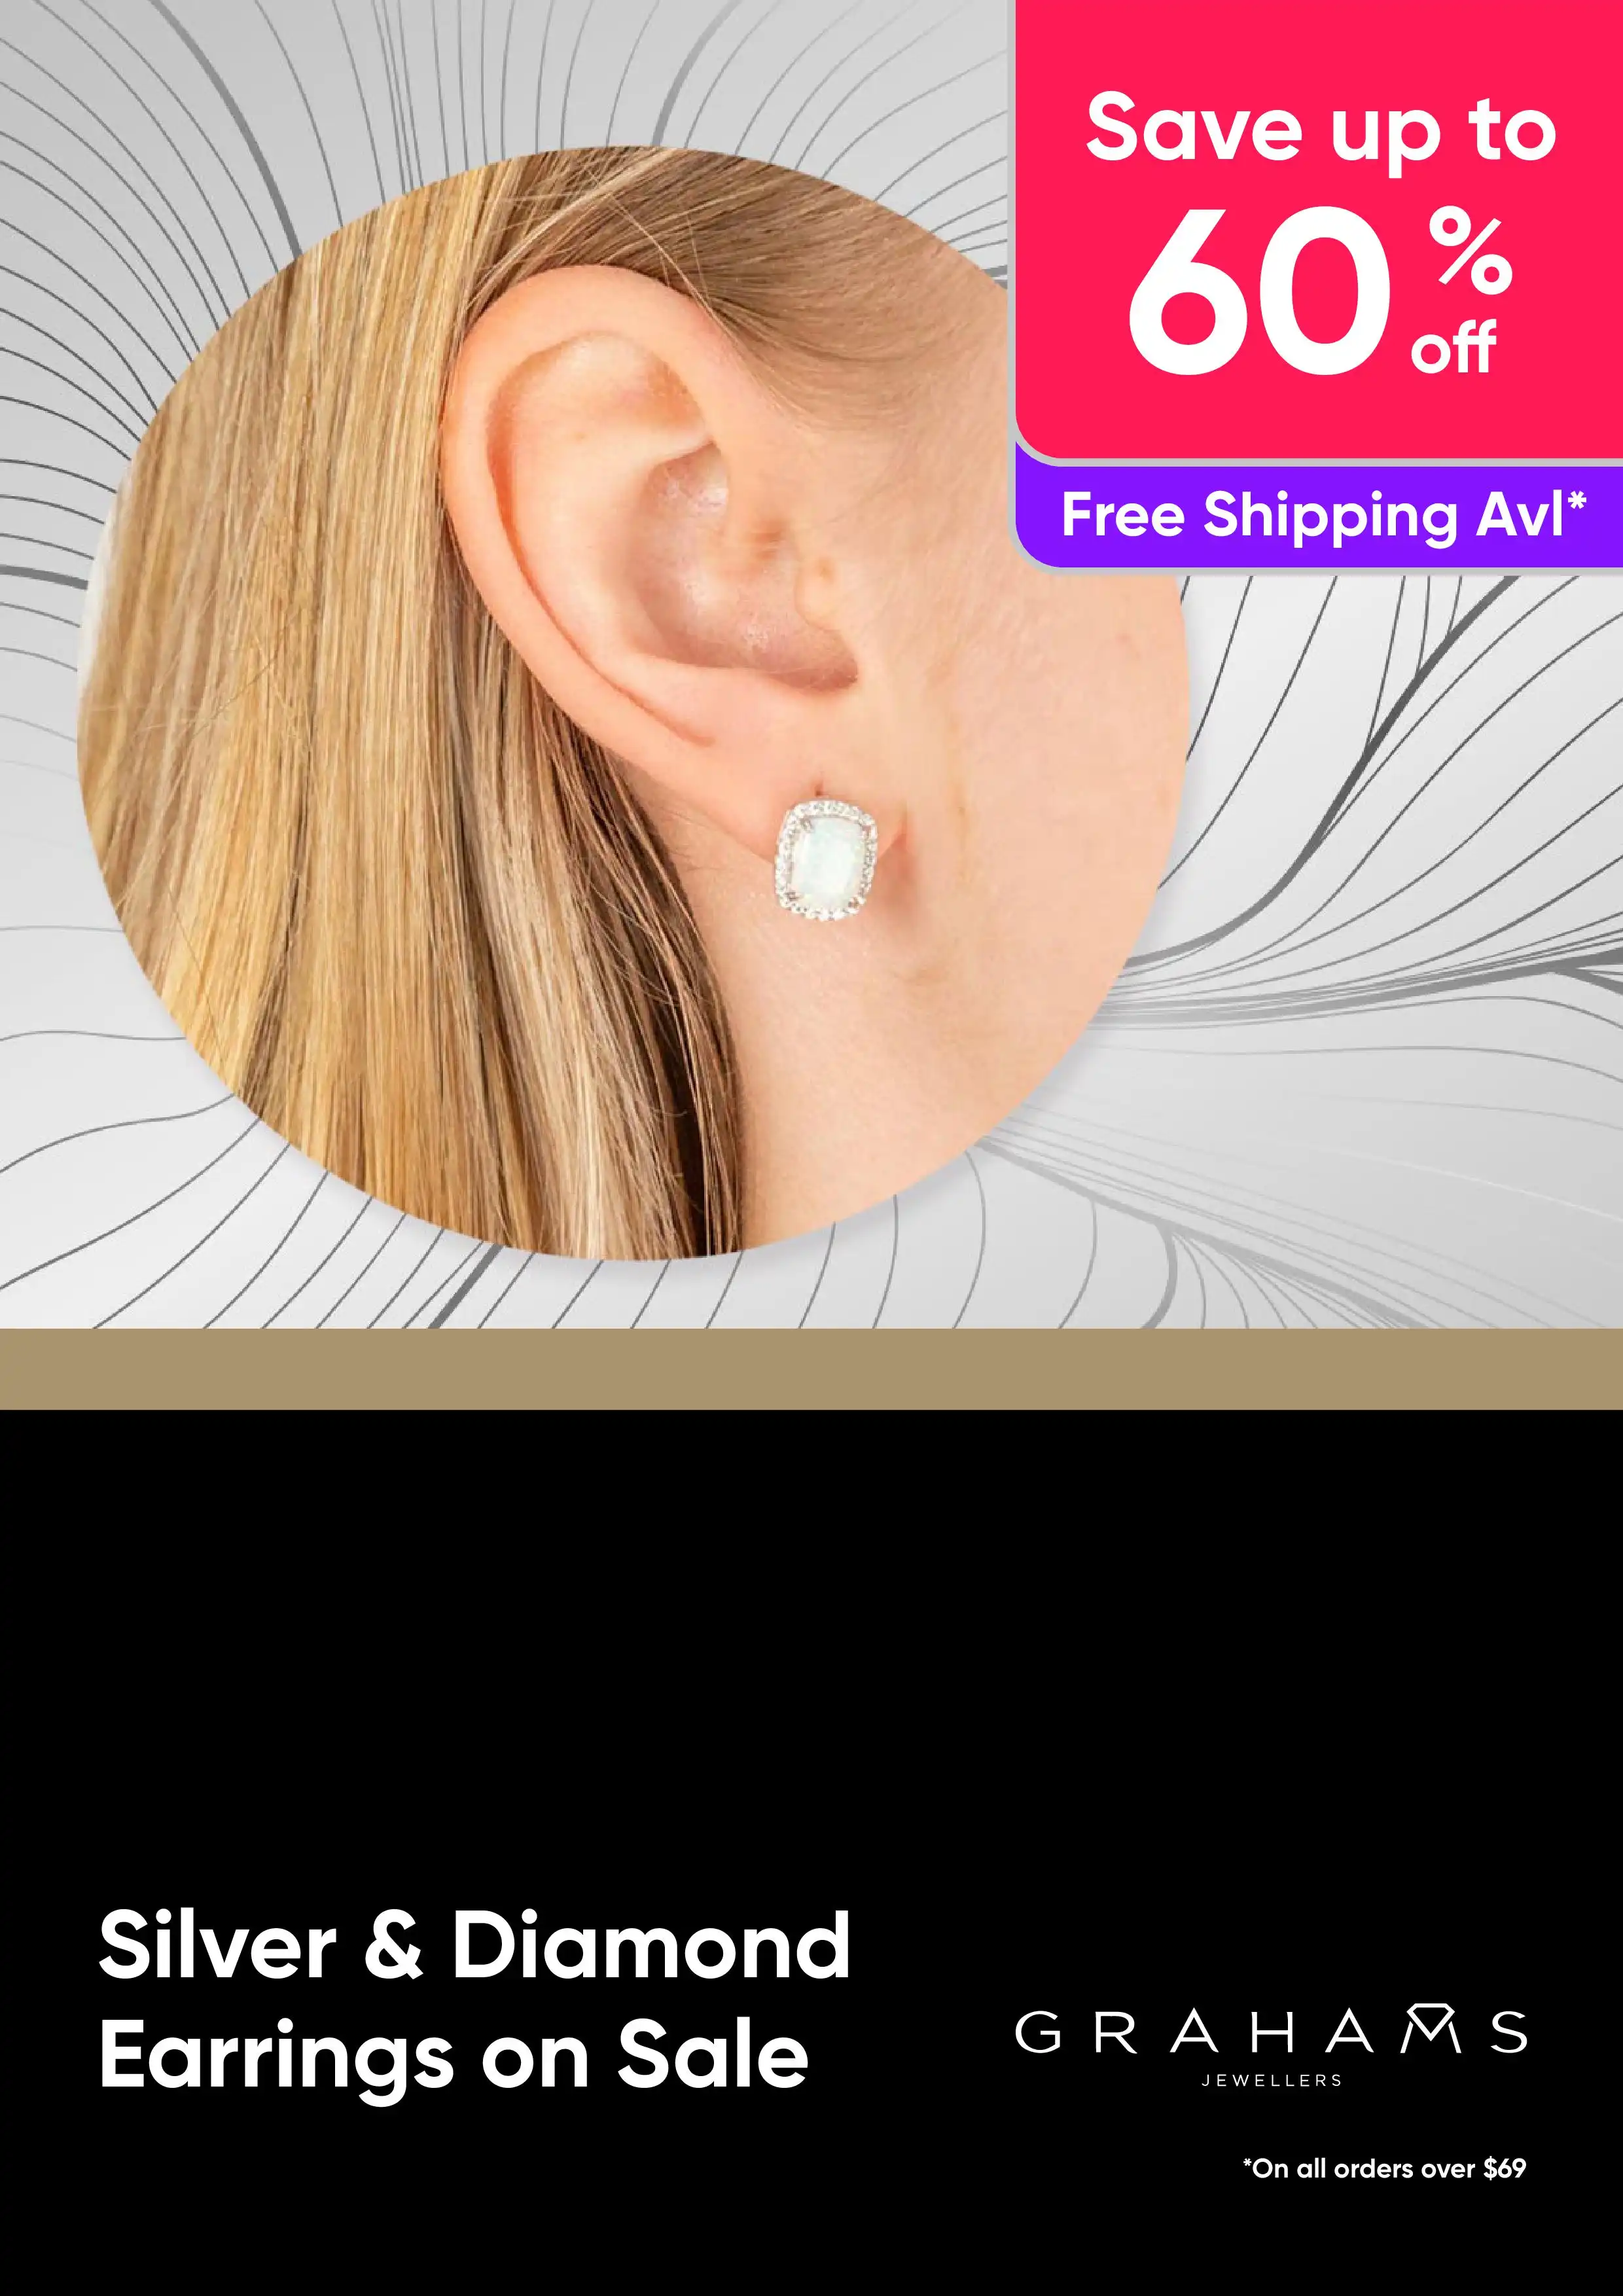 Silver and Diamond Earrings on Sale Up to 60% Off